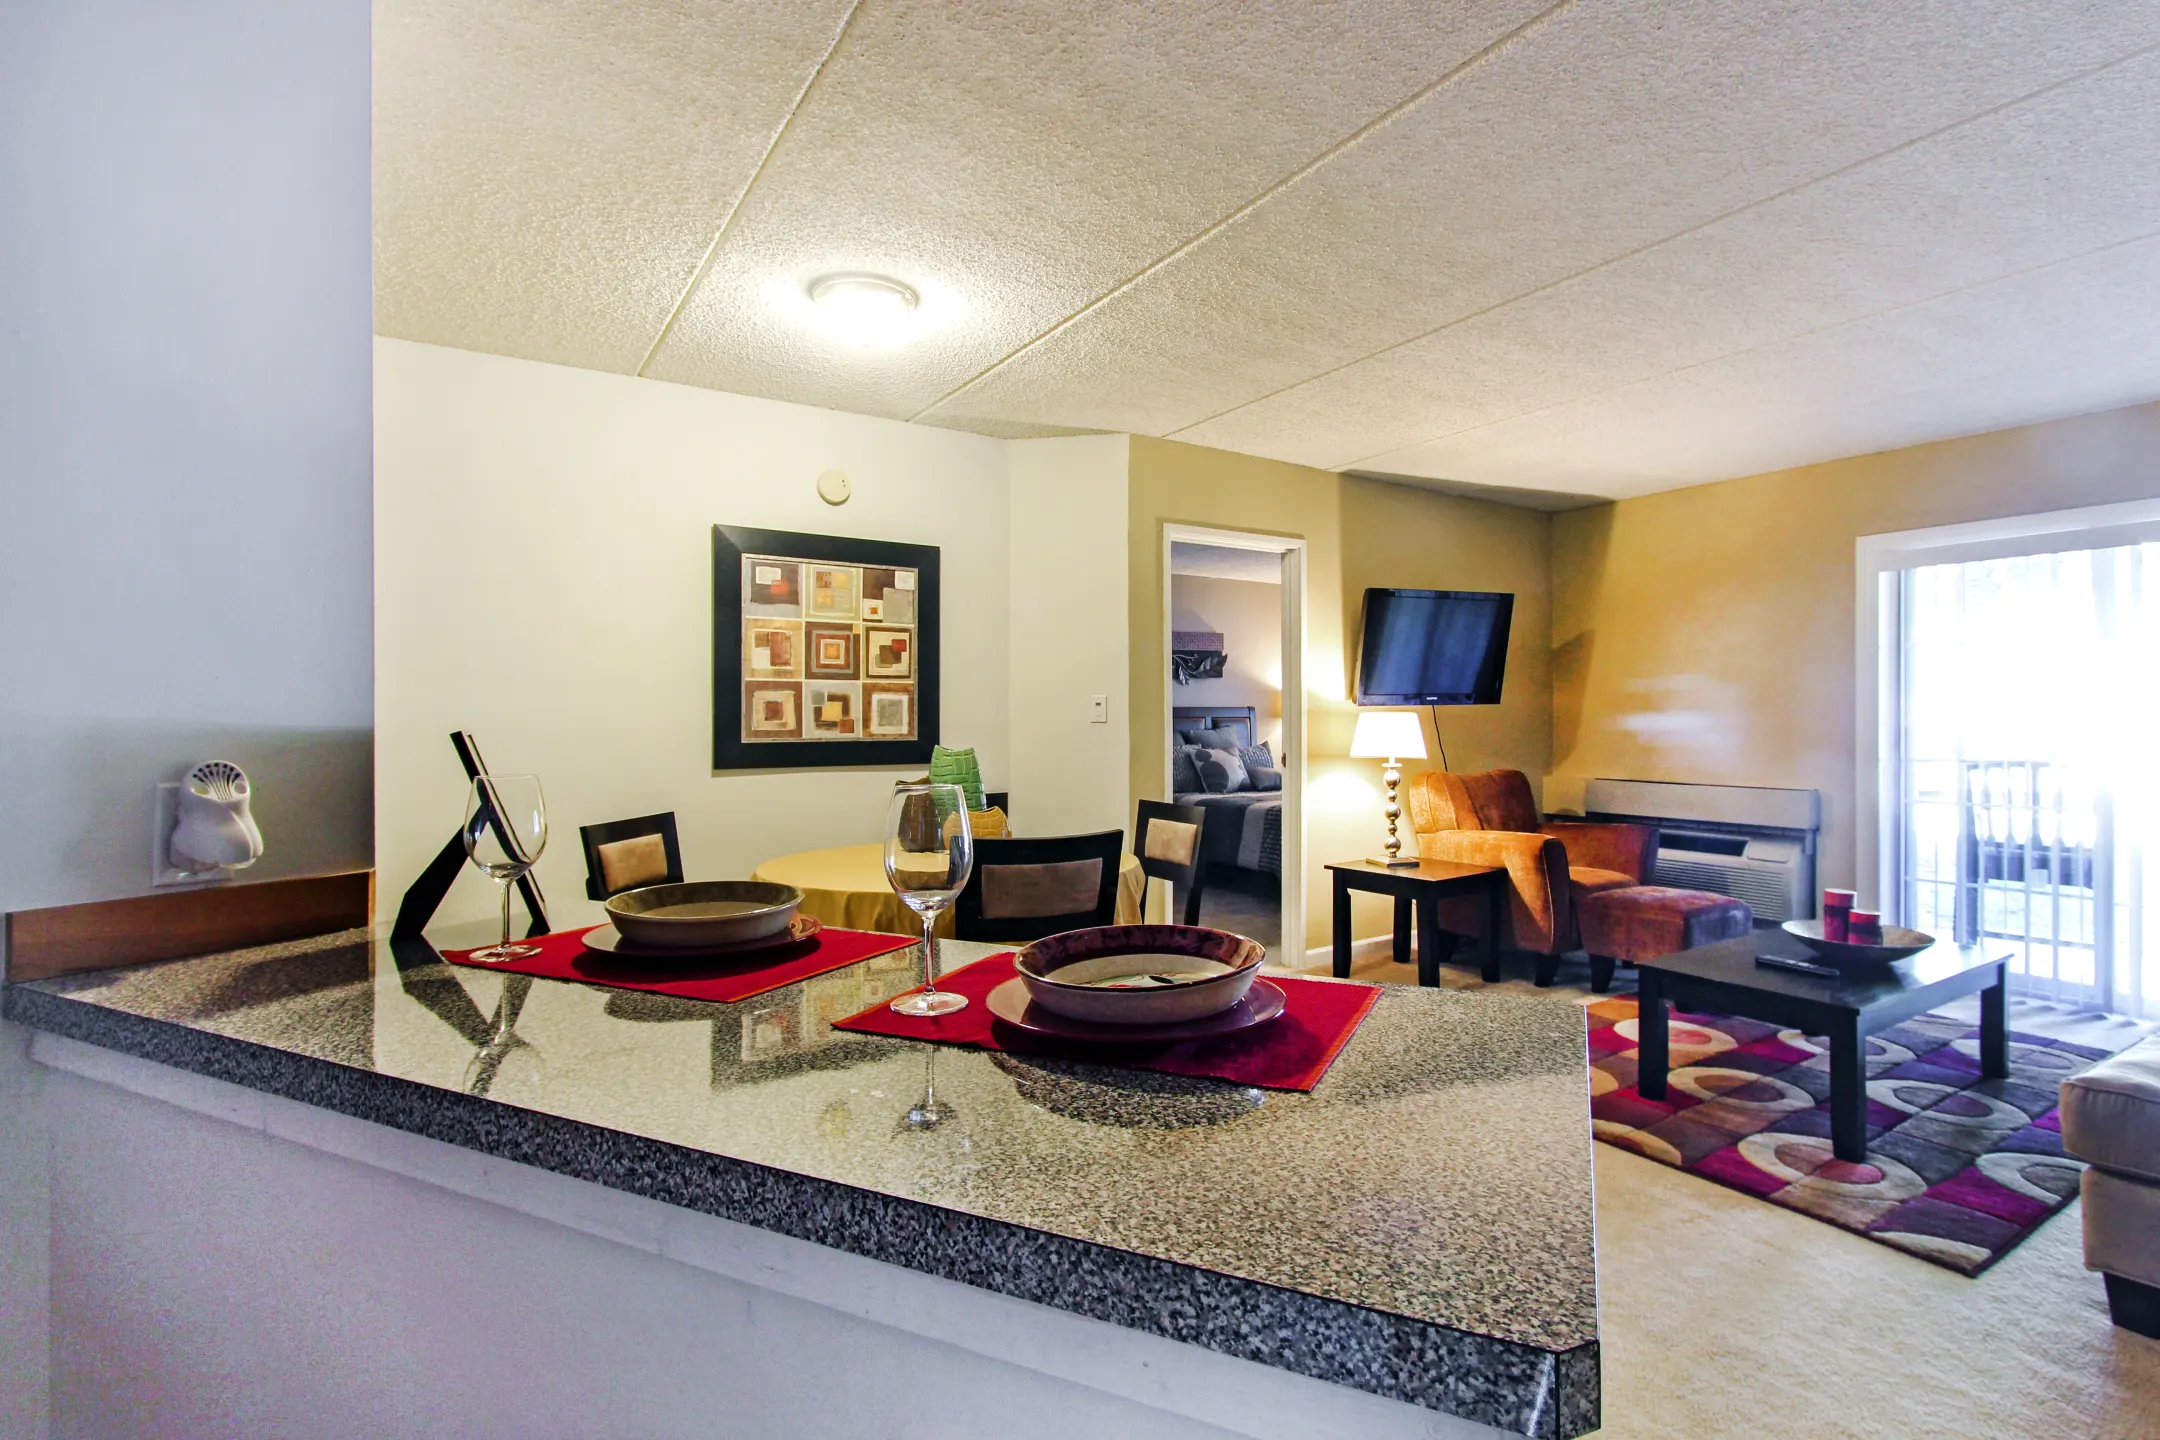 Living Room - Hudson Harbour Apartments - Poughkeepsie, NY